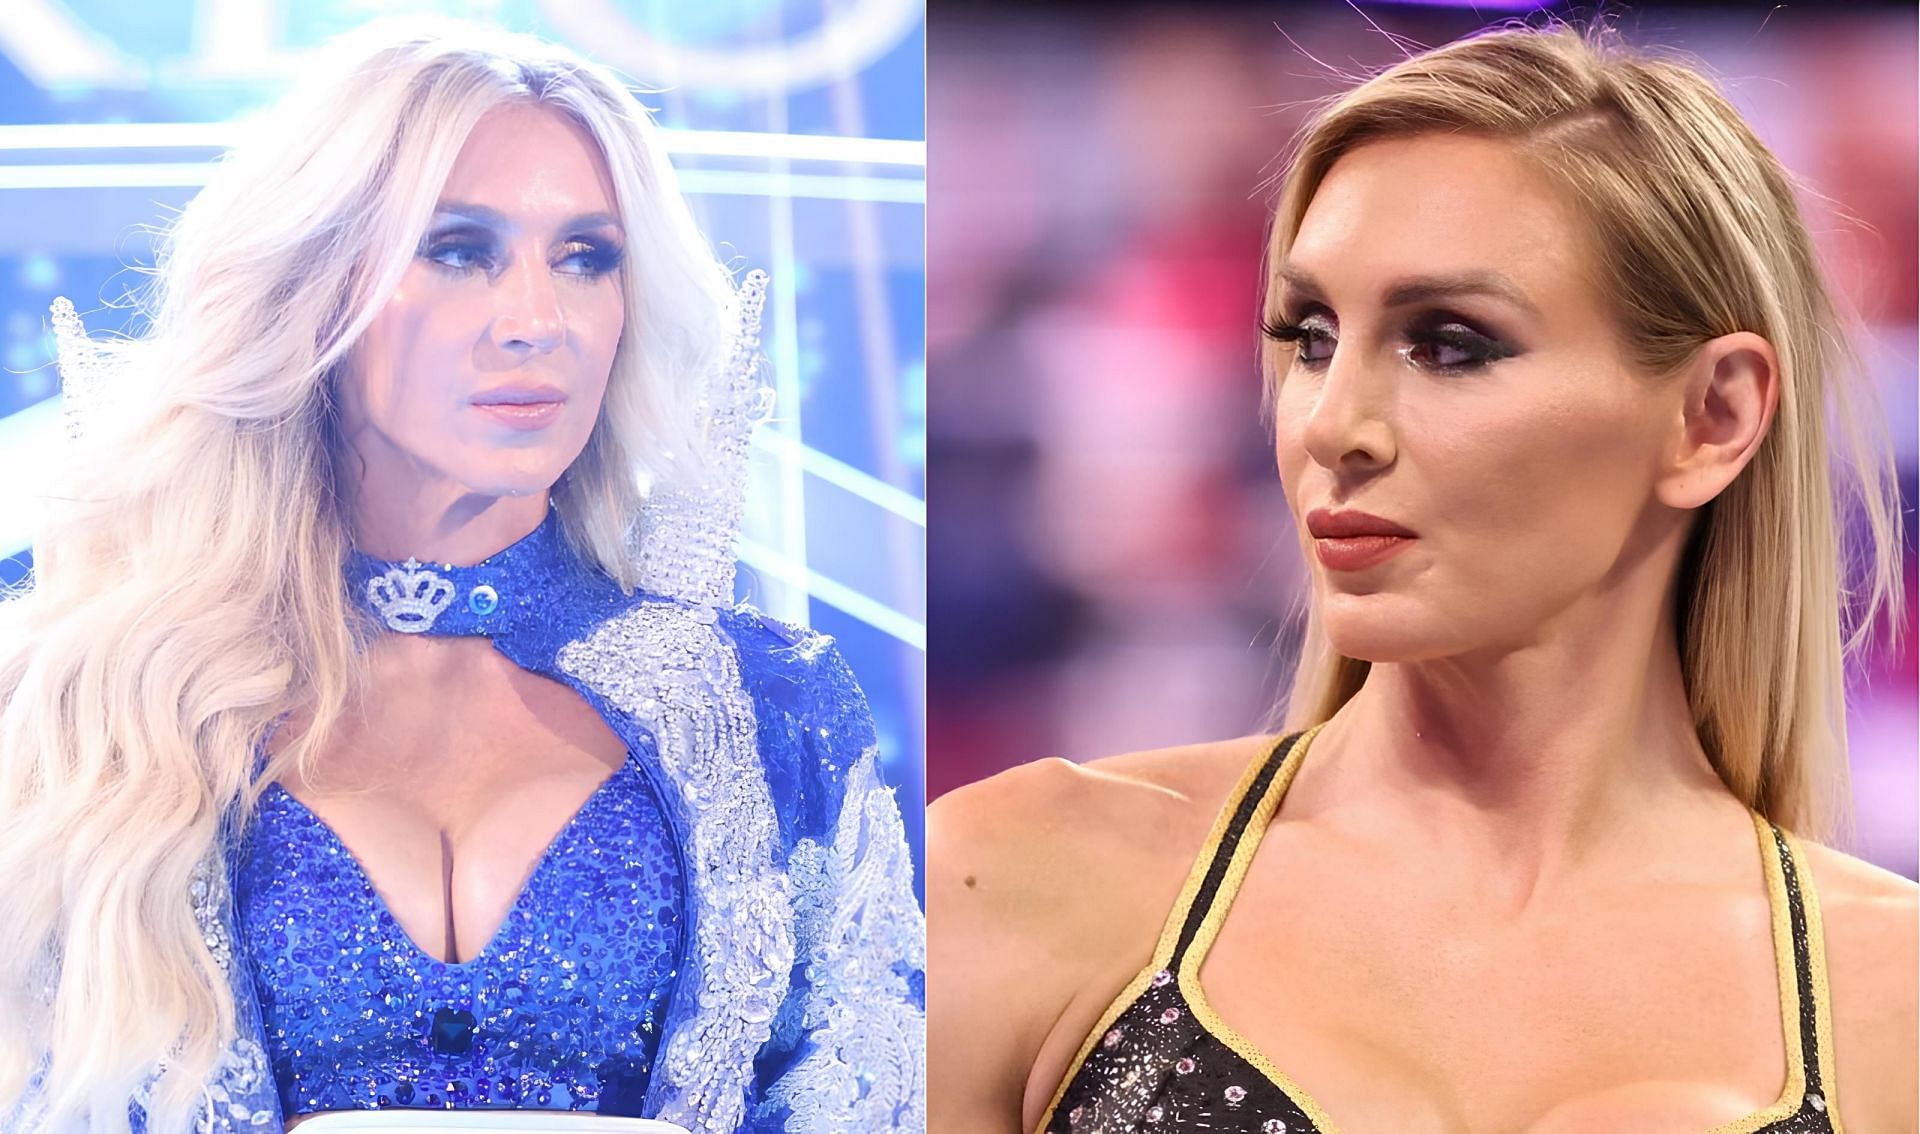 Charlotte Flair is currently drafted on SmackDown